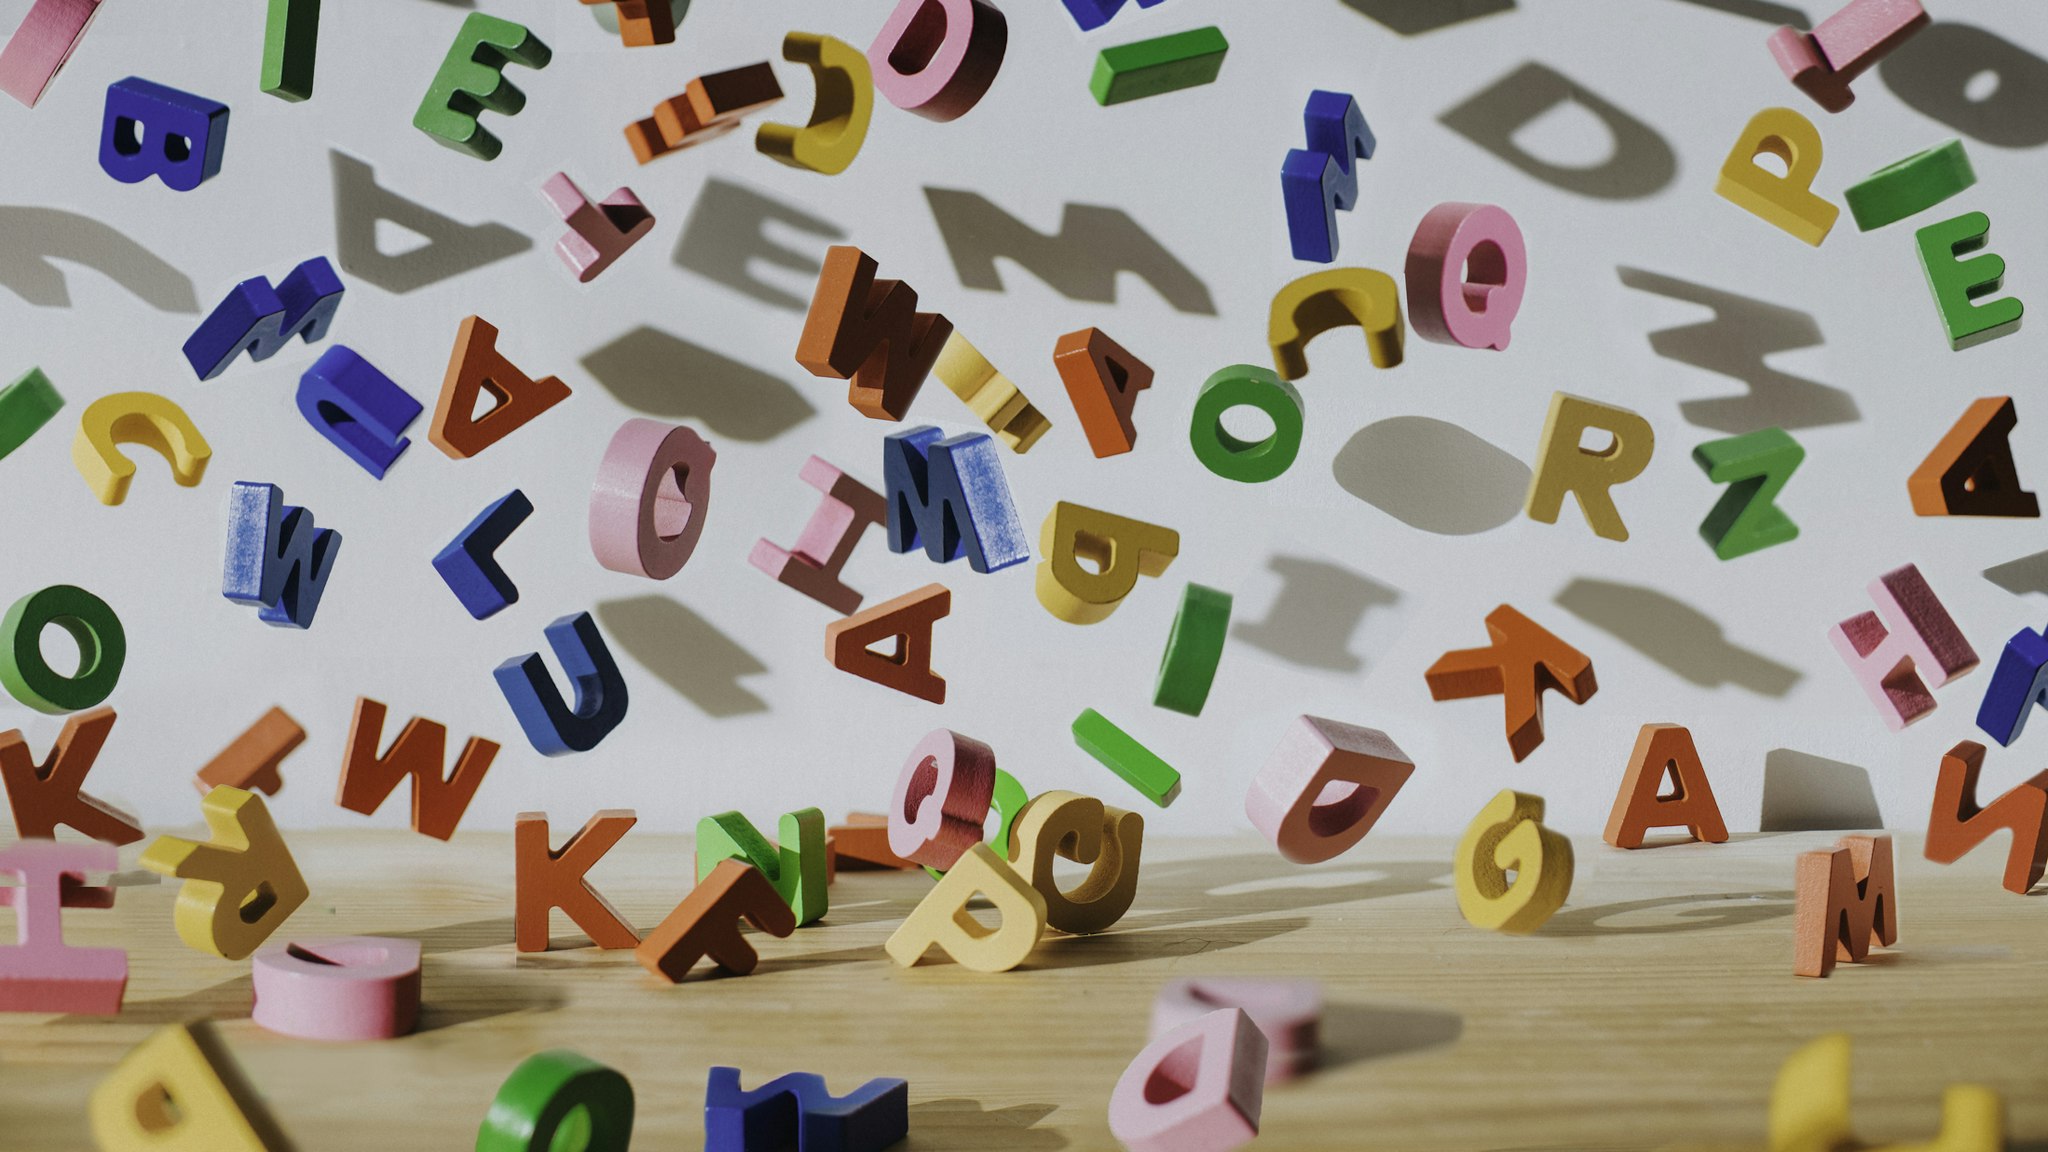 Conceptual image of colourful falling letters, casting shadows on a white wall.